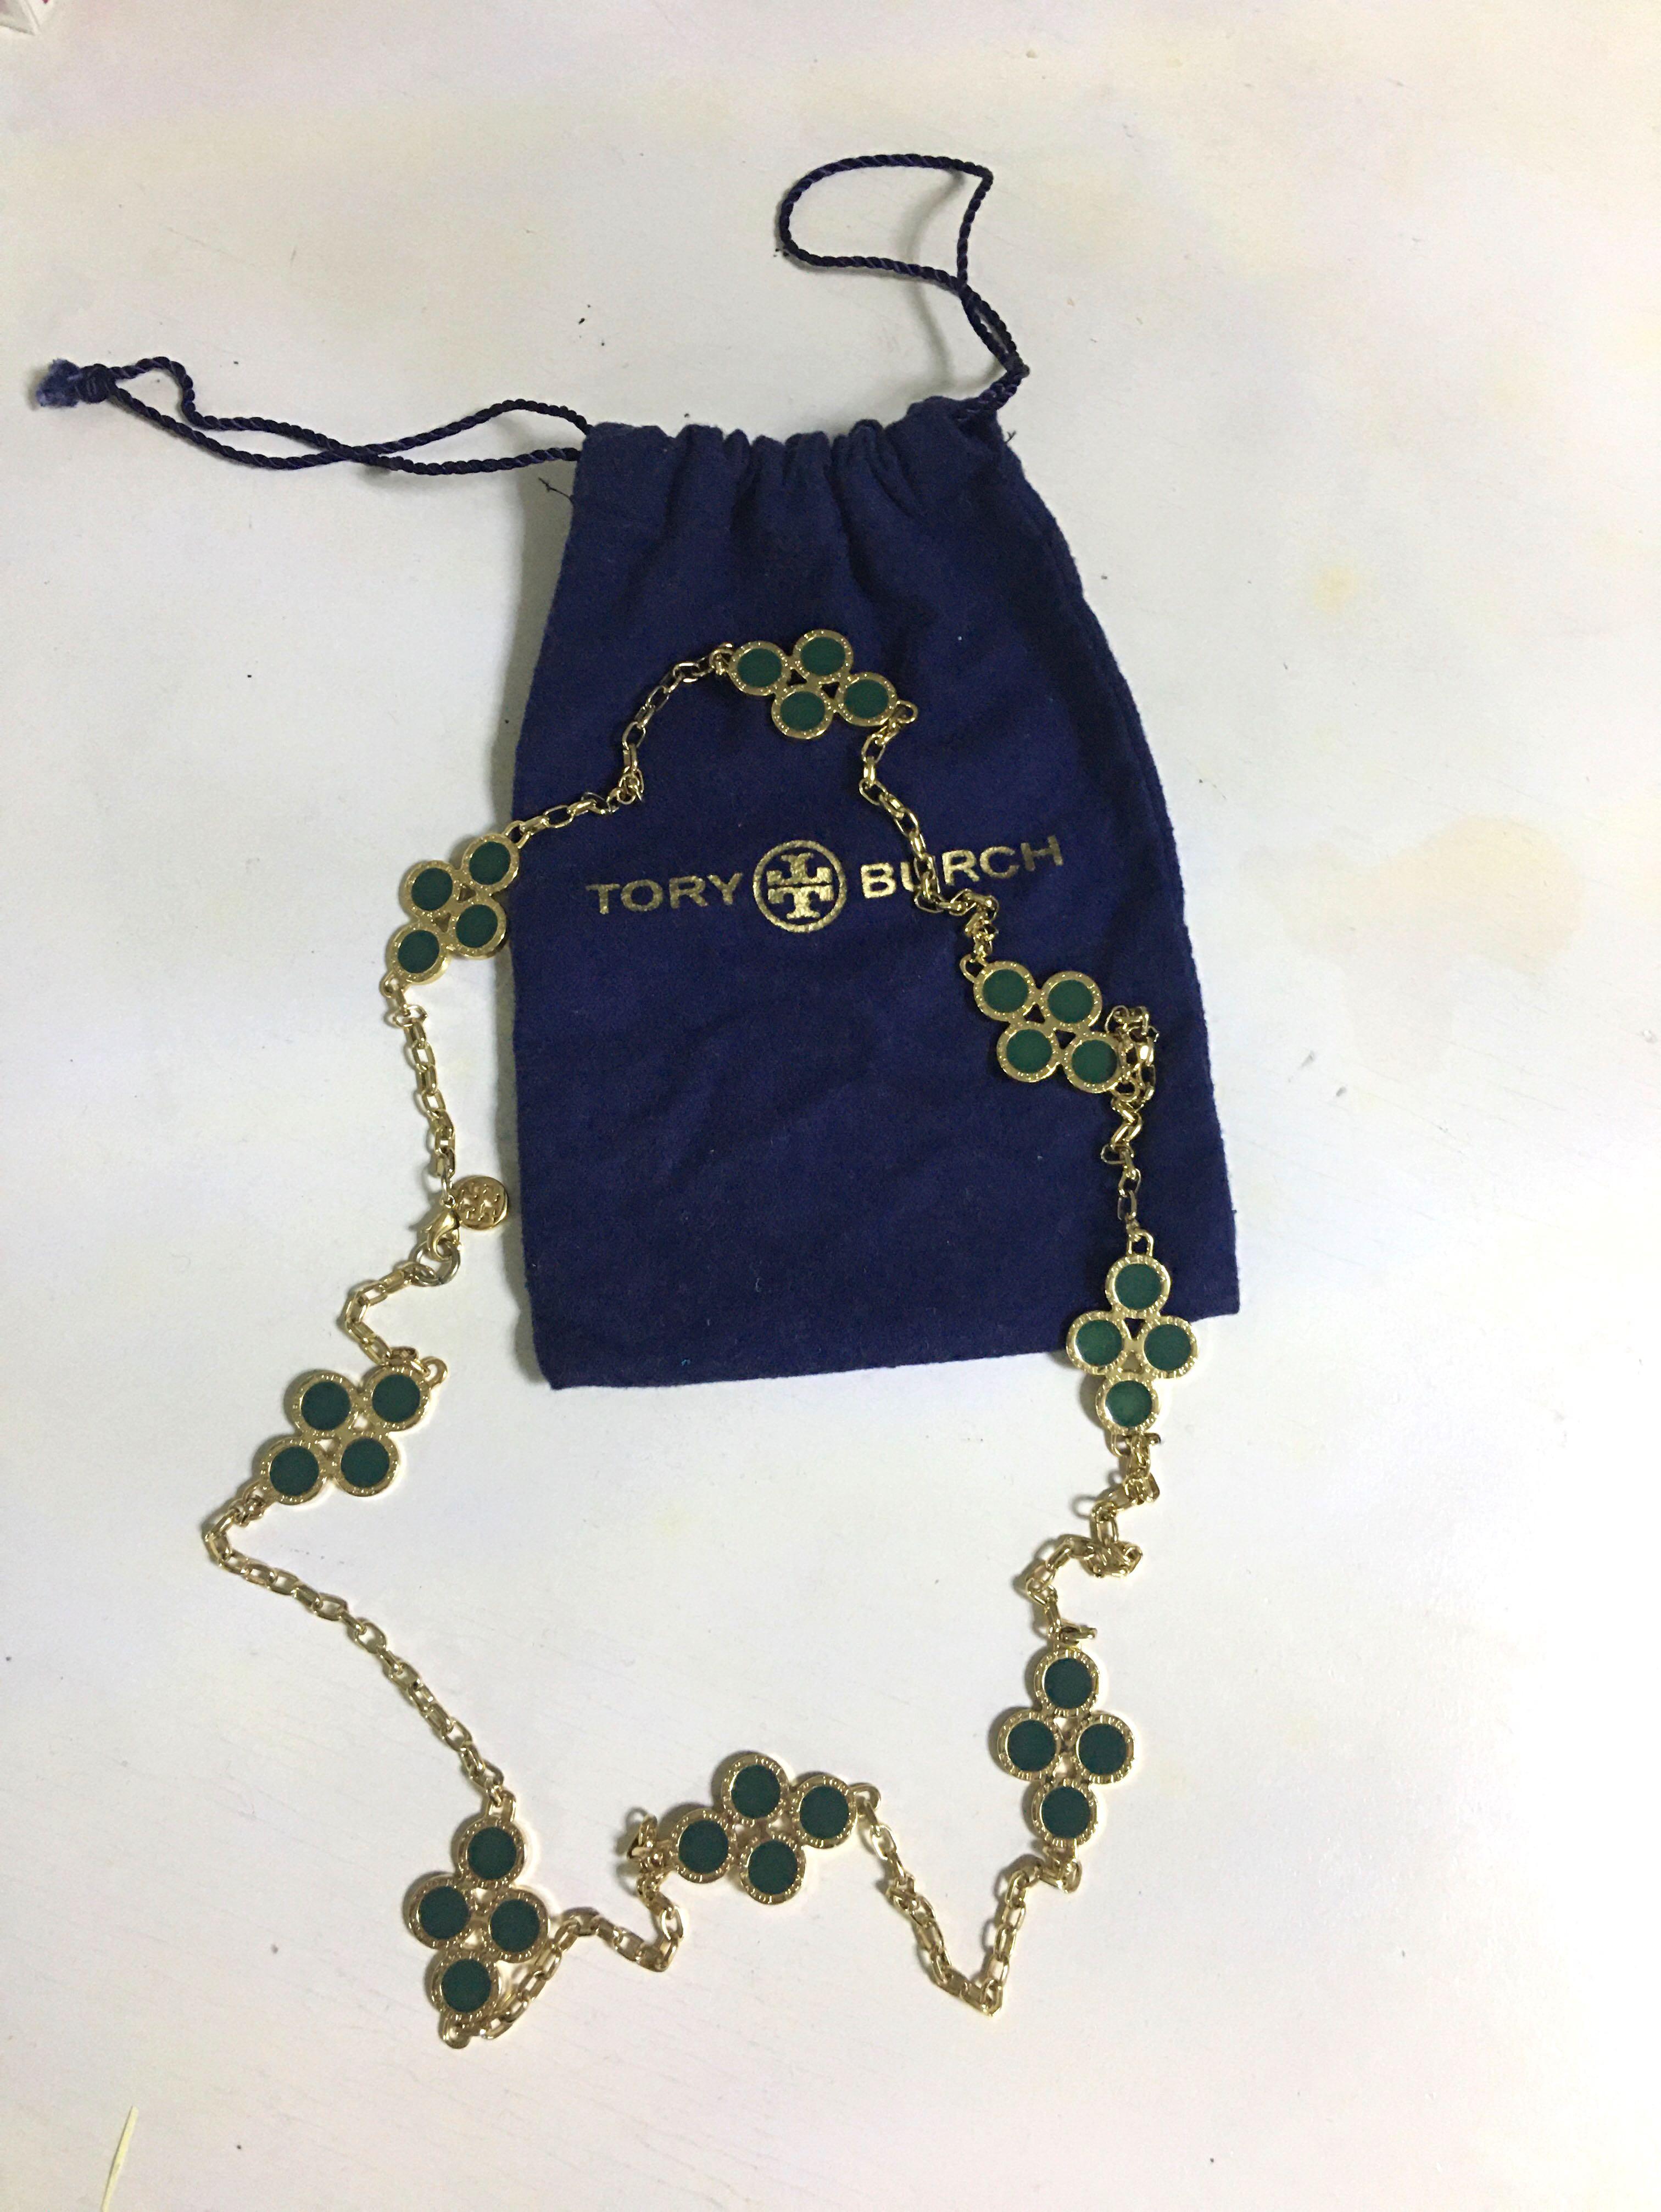 Tory Burch Large Clover Chain Long Necklace| Tory Burch Costume Necklace |Tory  Burch Jewelry, Women's Fashion, Jewelry & Organizers, Necklaces on Carousell